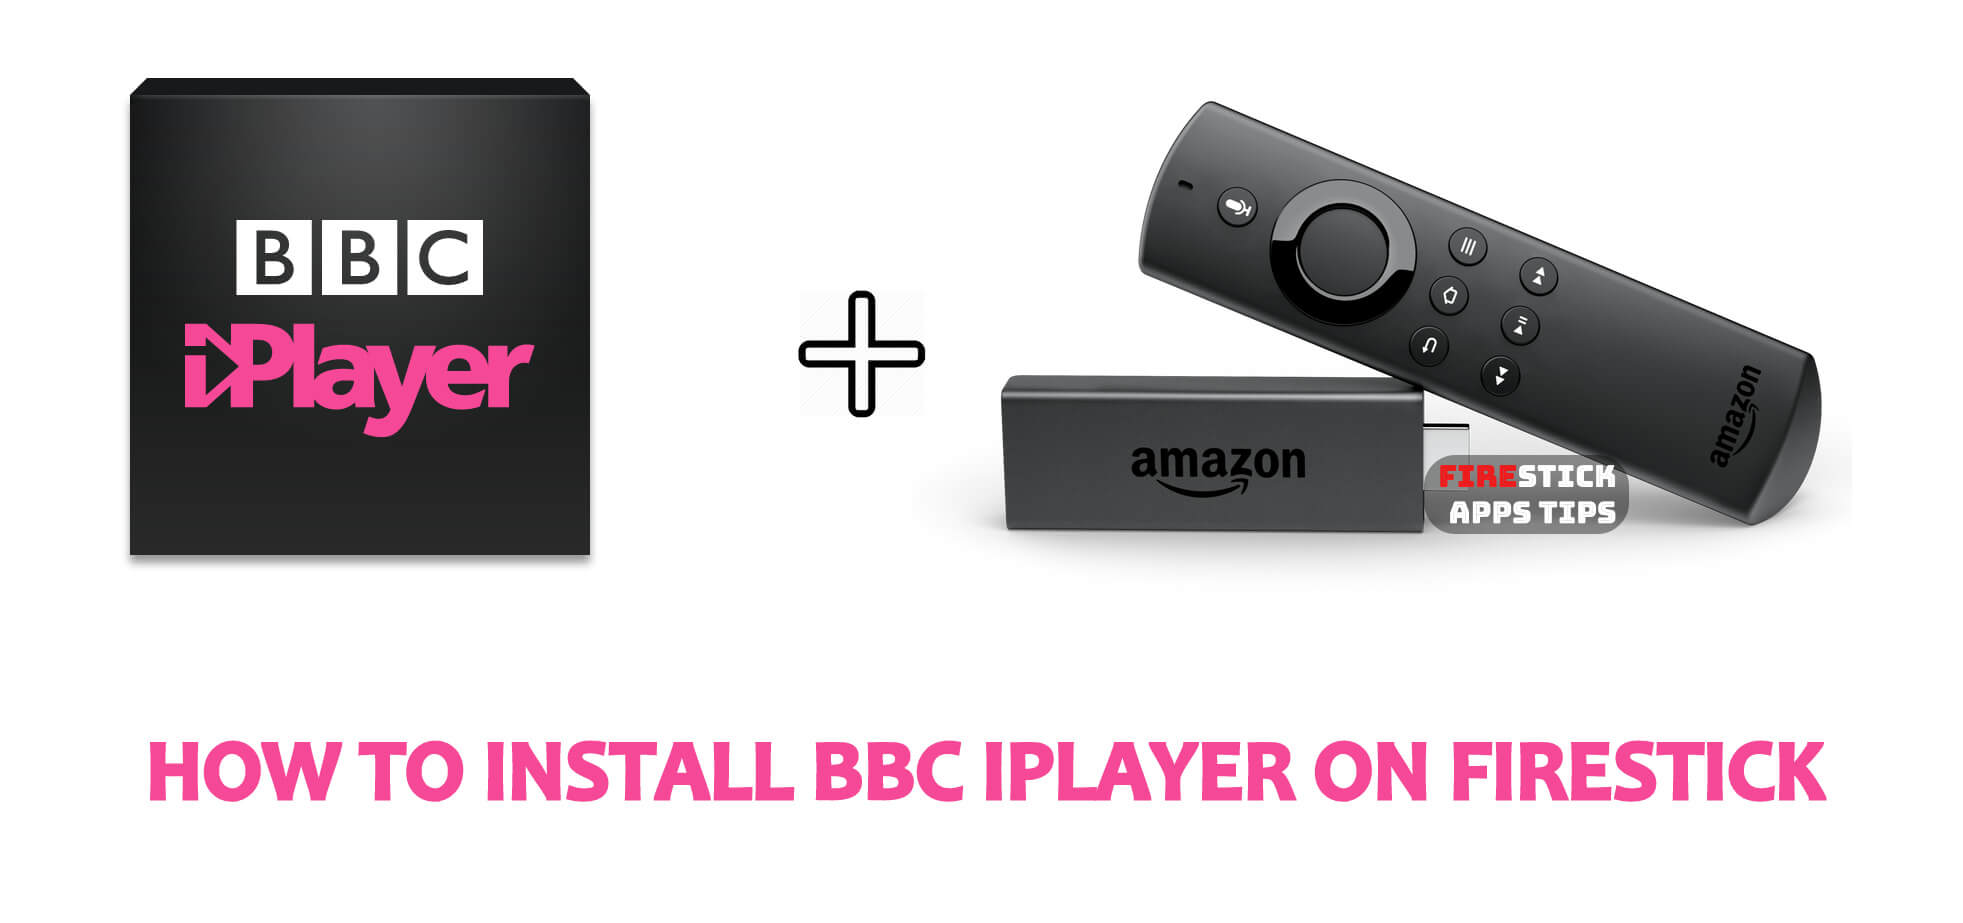 How to Install BBC iPlayer on Firestick / Fire TV